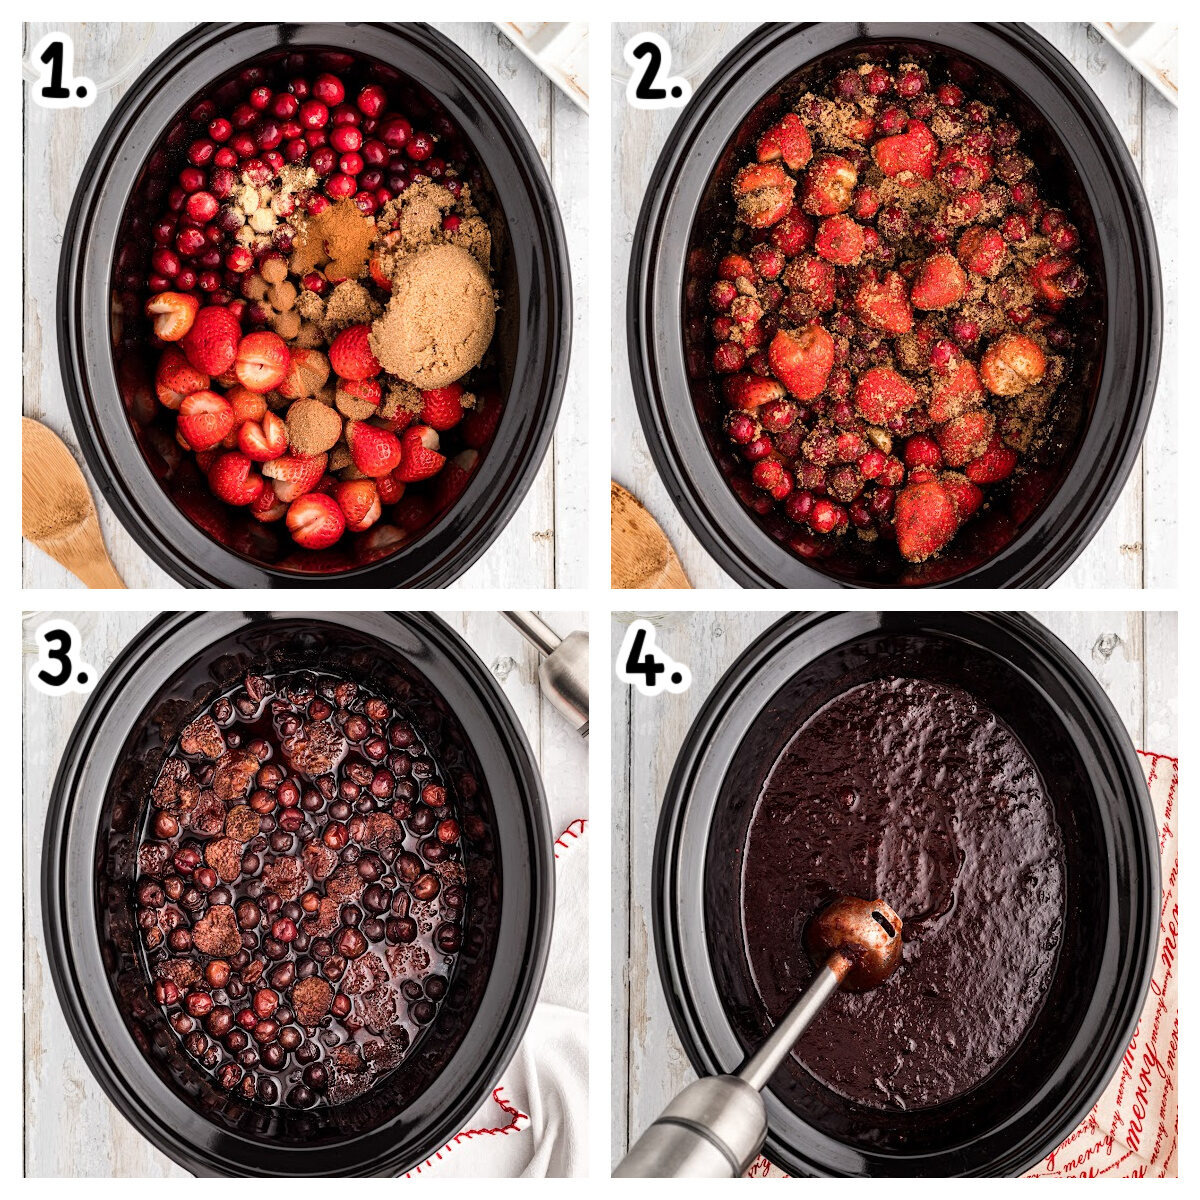 4 images showing how to make christmas jam in a slow cooker.